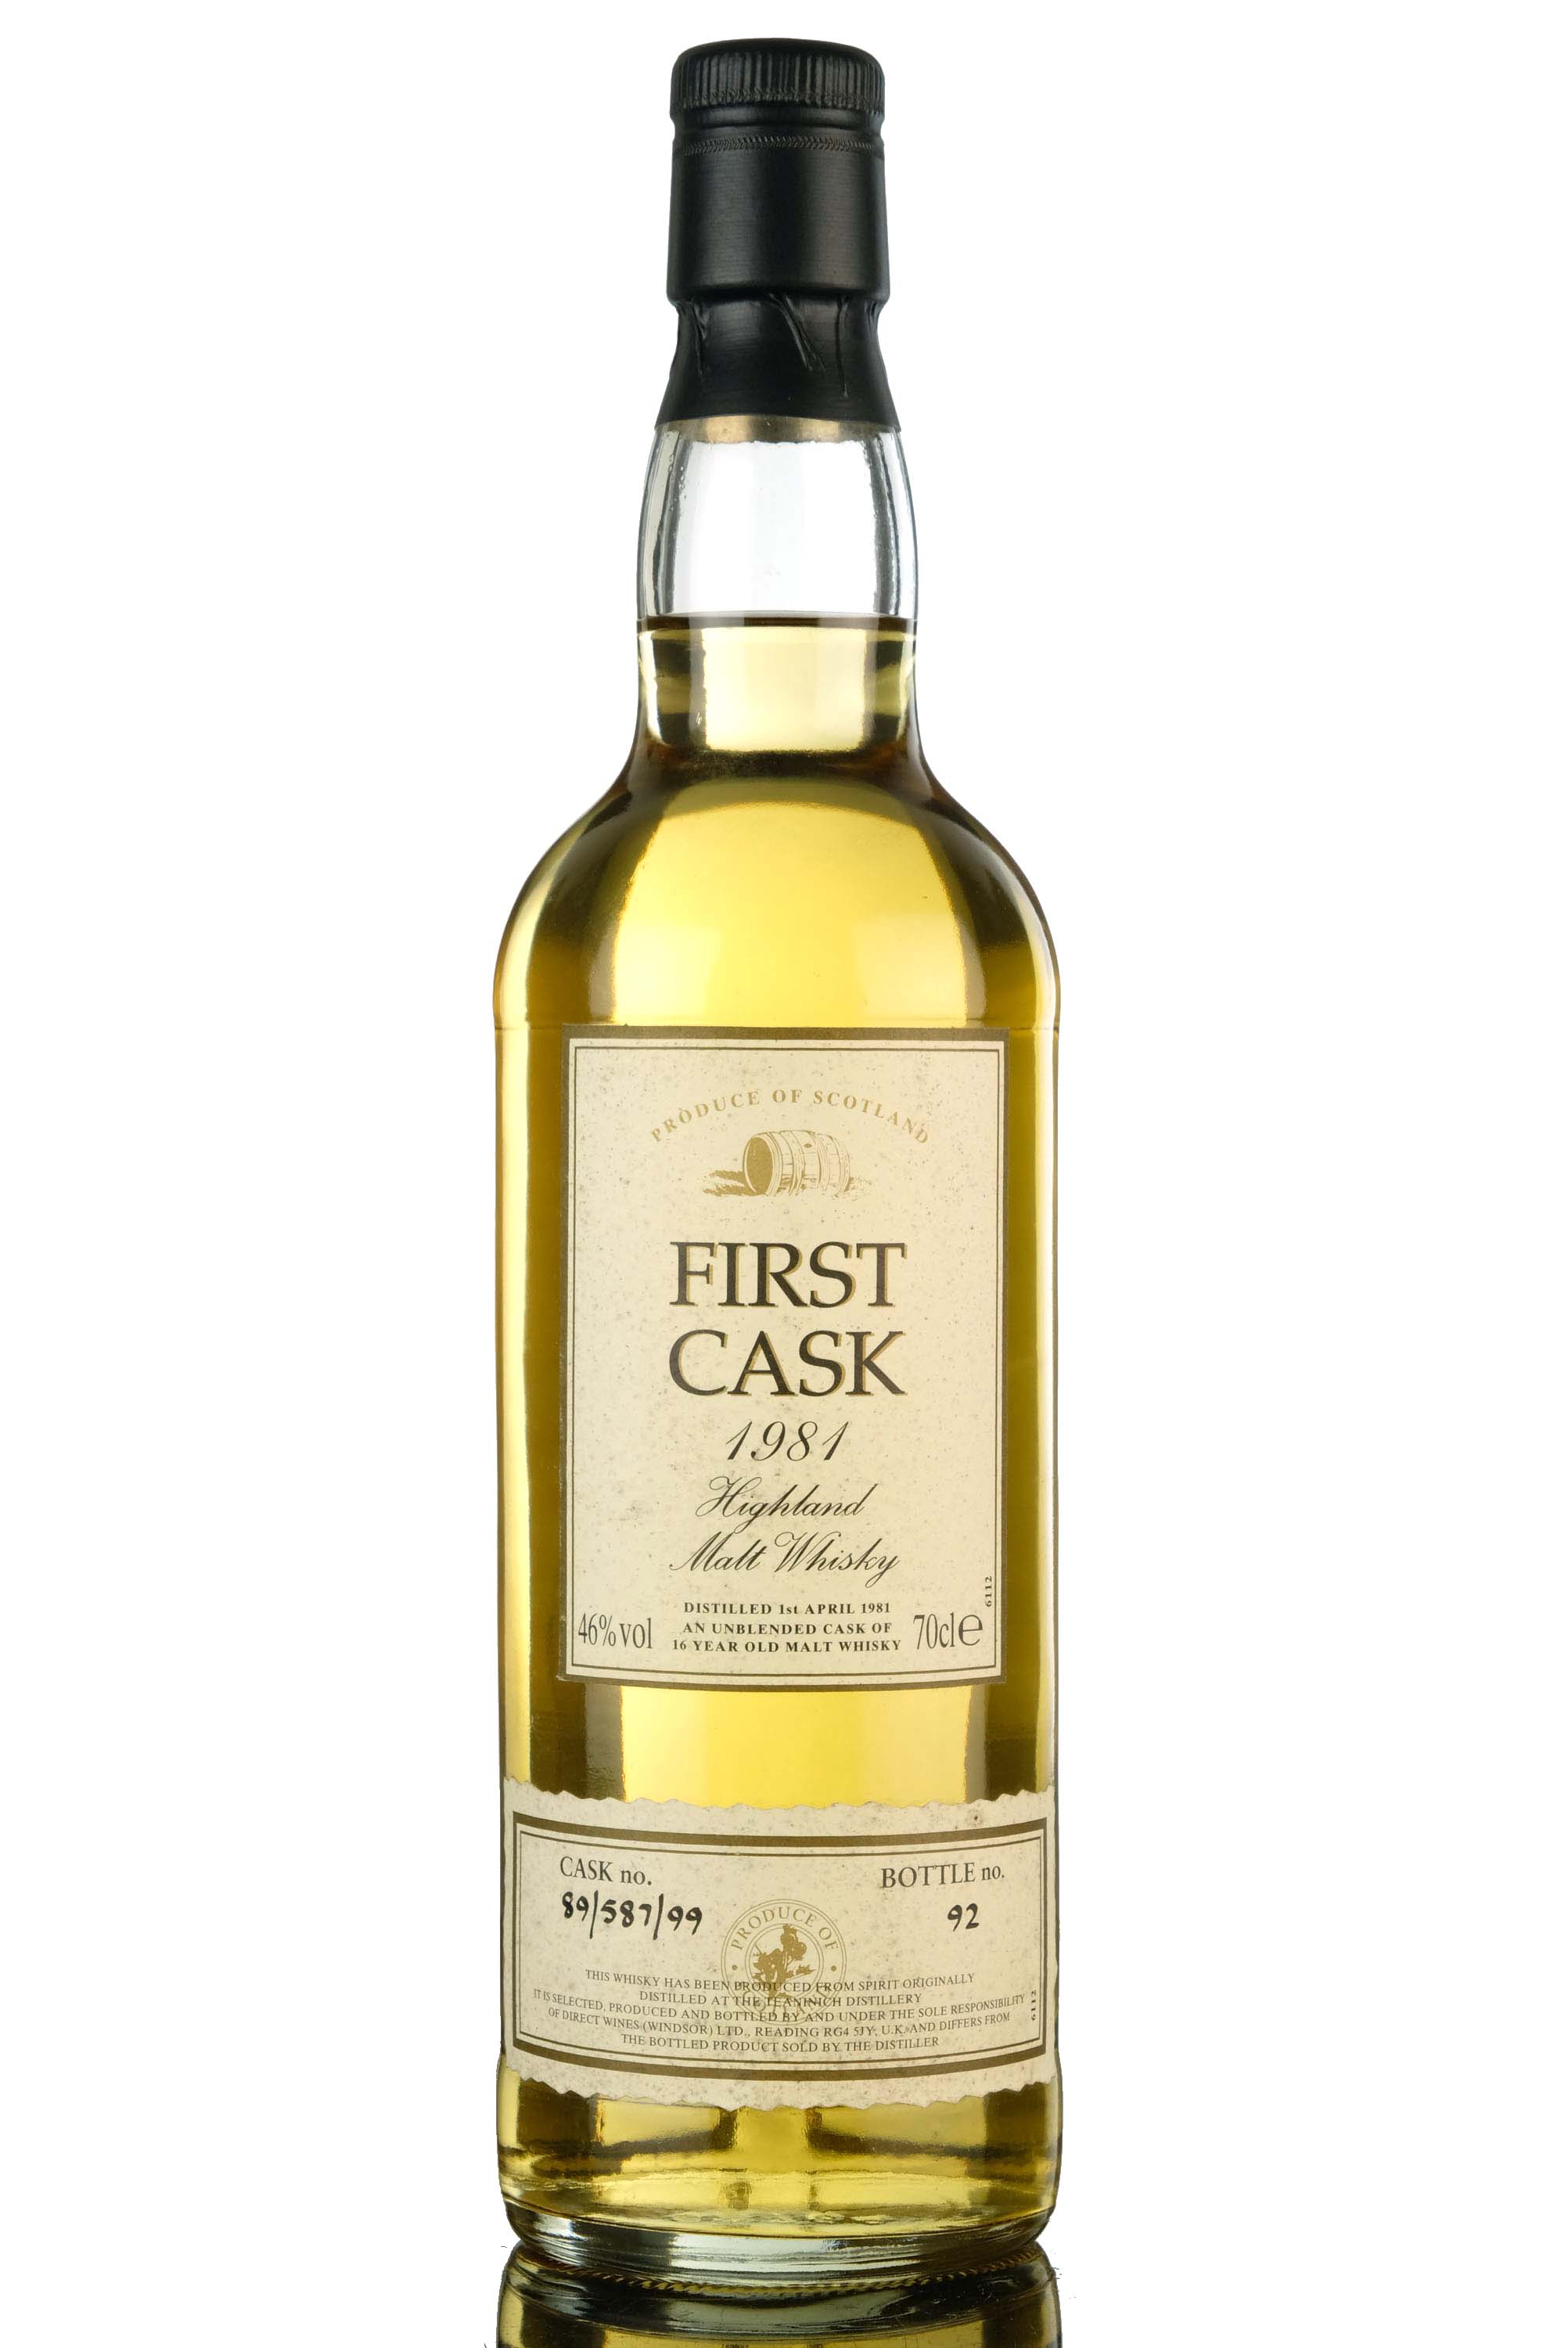 Teaninich 1981 - 16 Year Old - First Cask 89/587/99